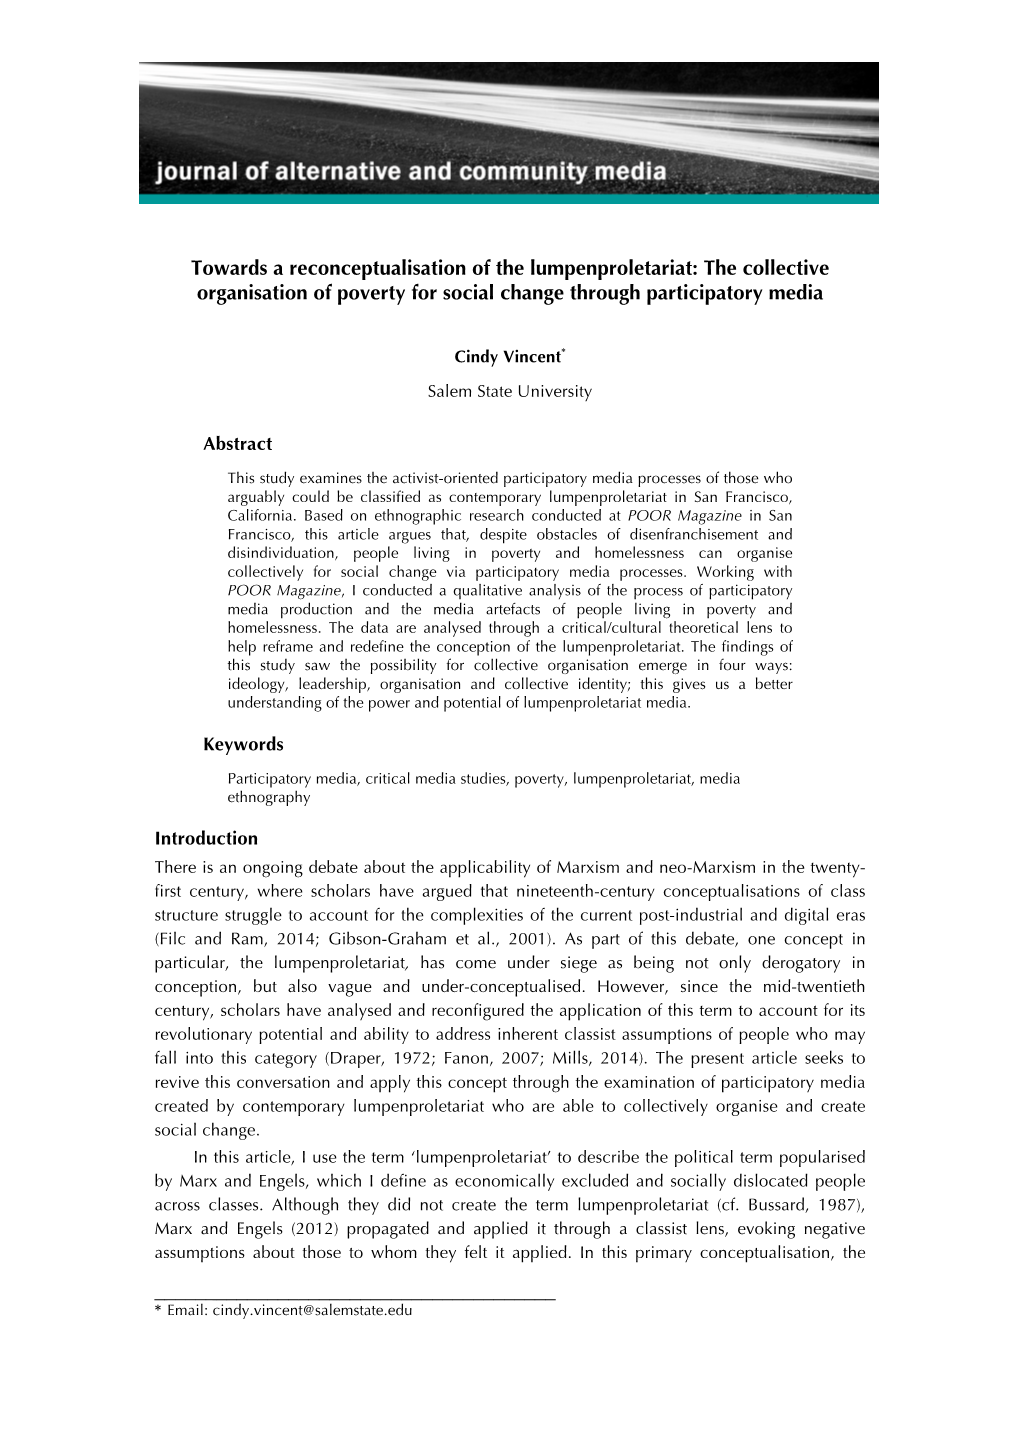 Towards a Reconceptualisation of the Lumpenproletariat: the Collective Organisation of Poverty for Social Change Through Participatory Media